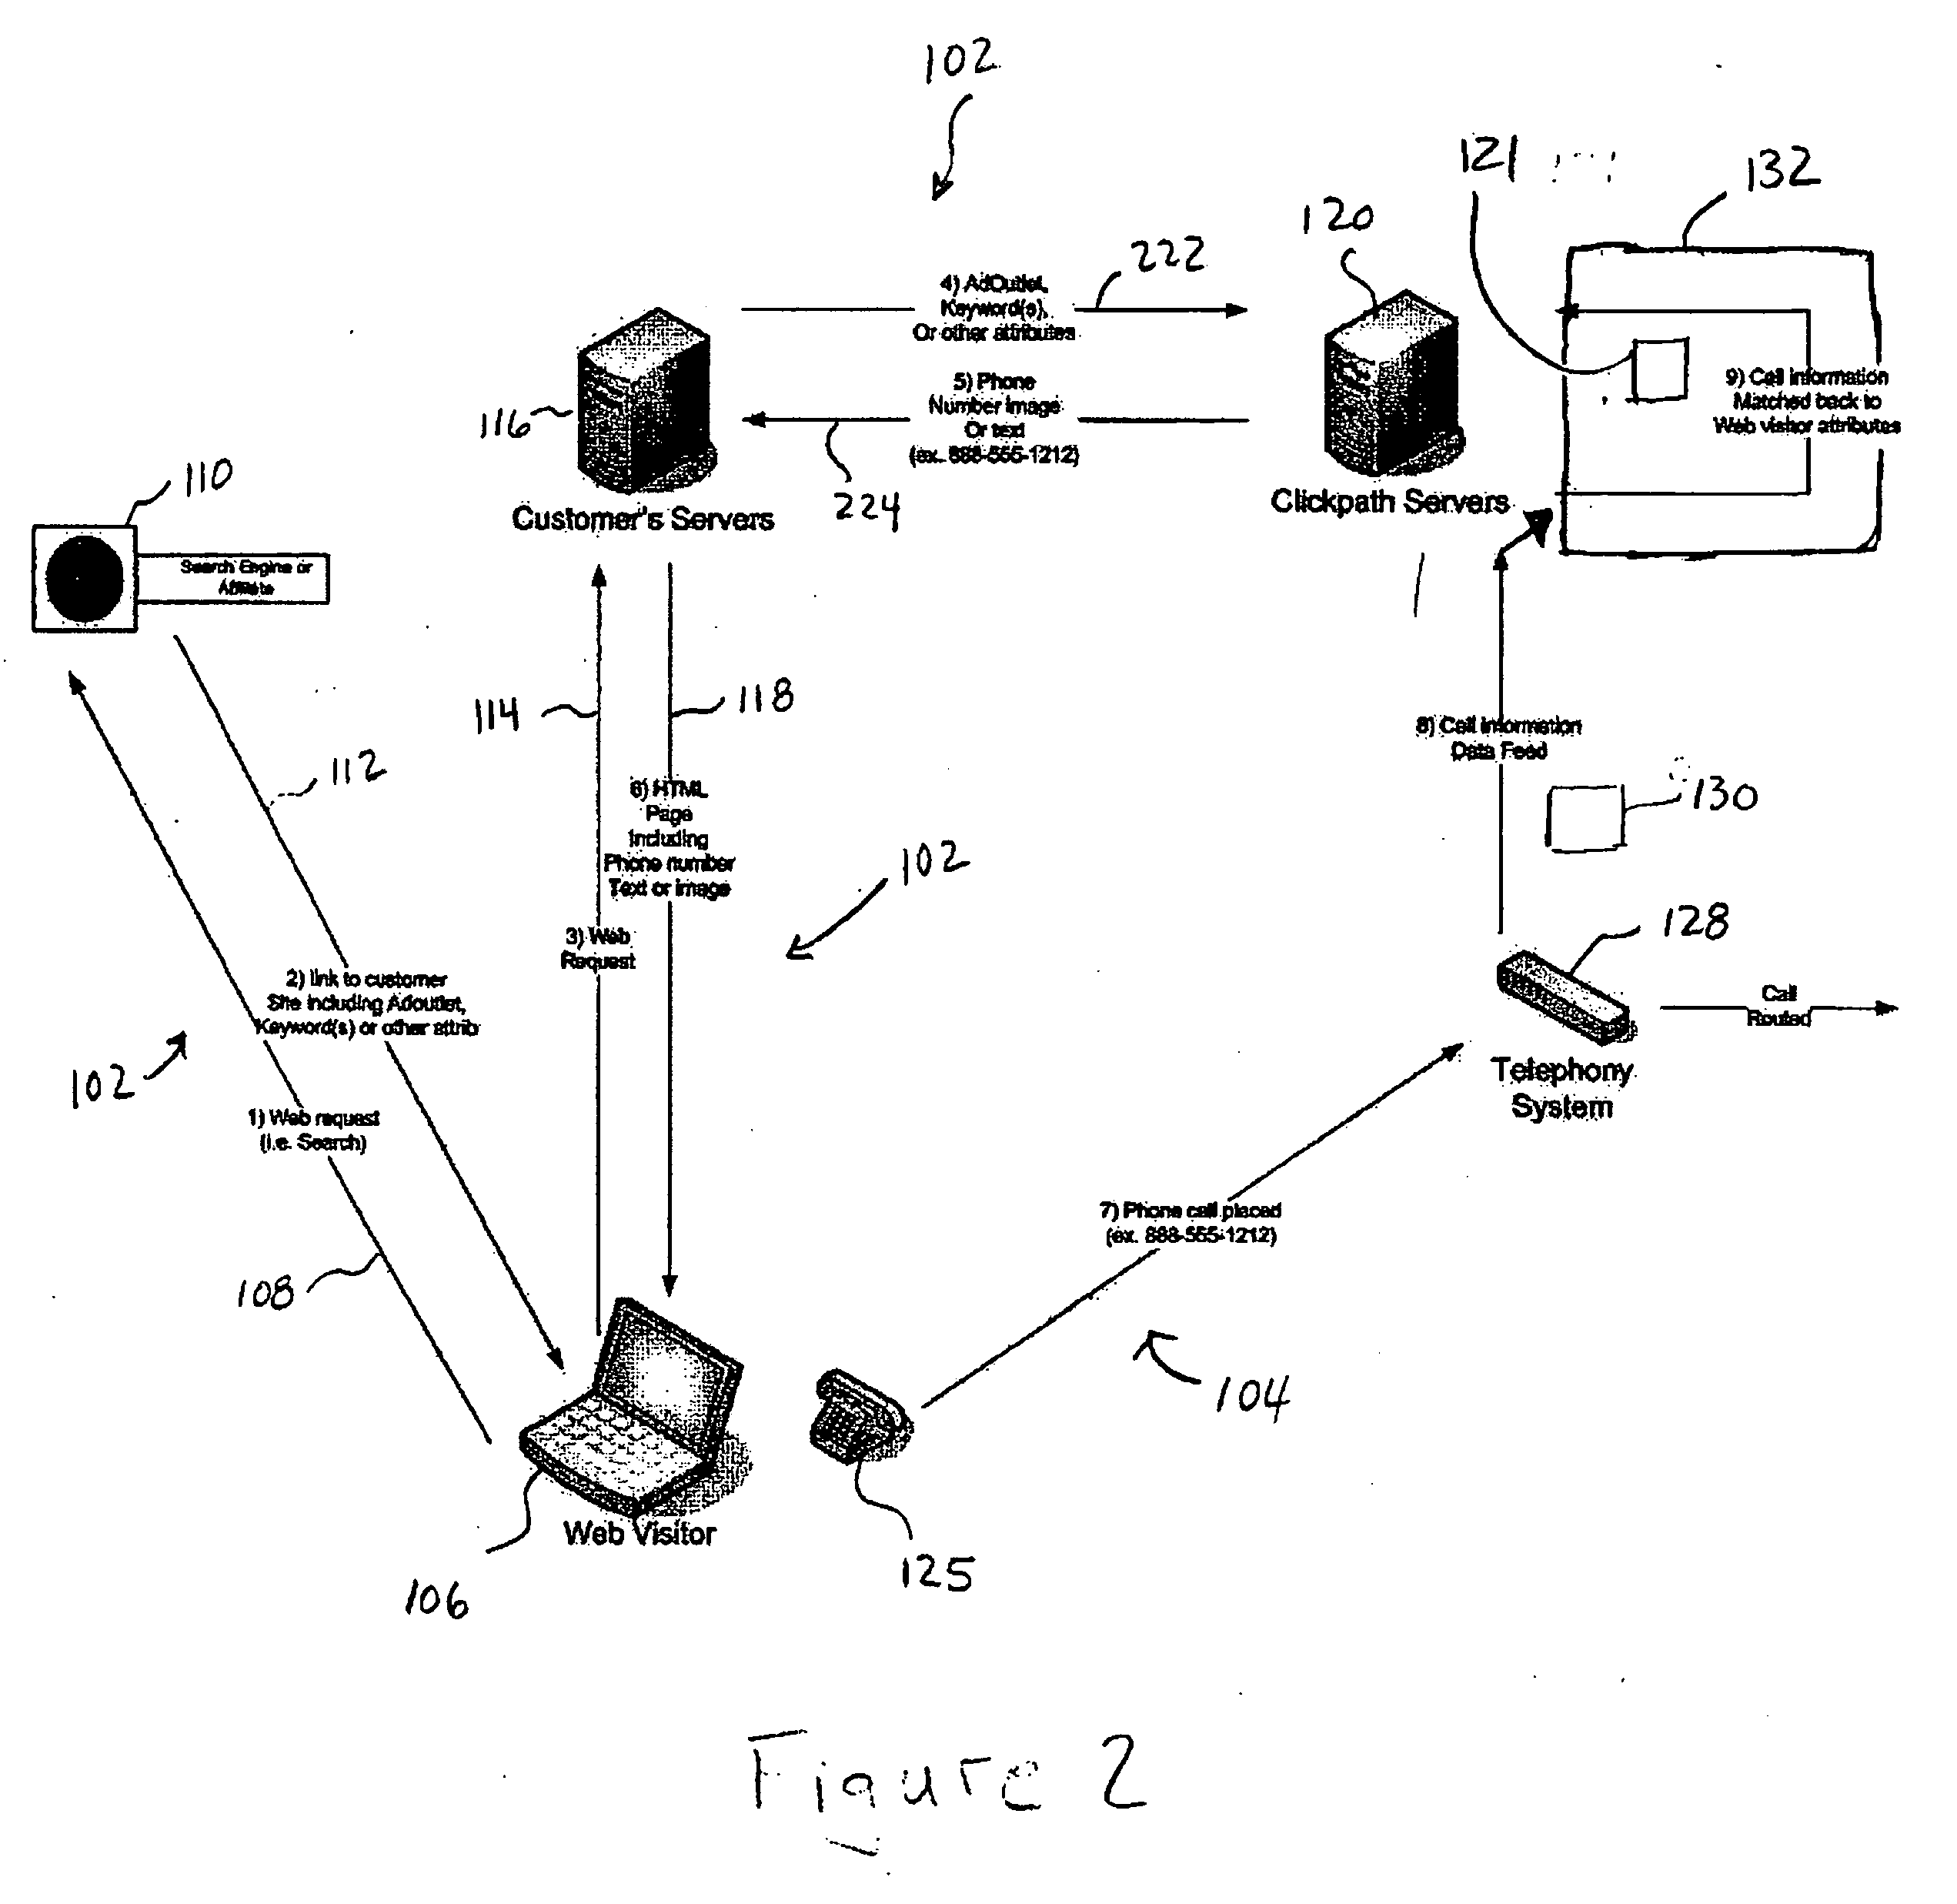 Method and system for tracking online promotional source to offline activity